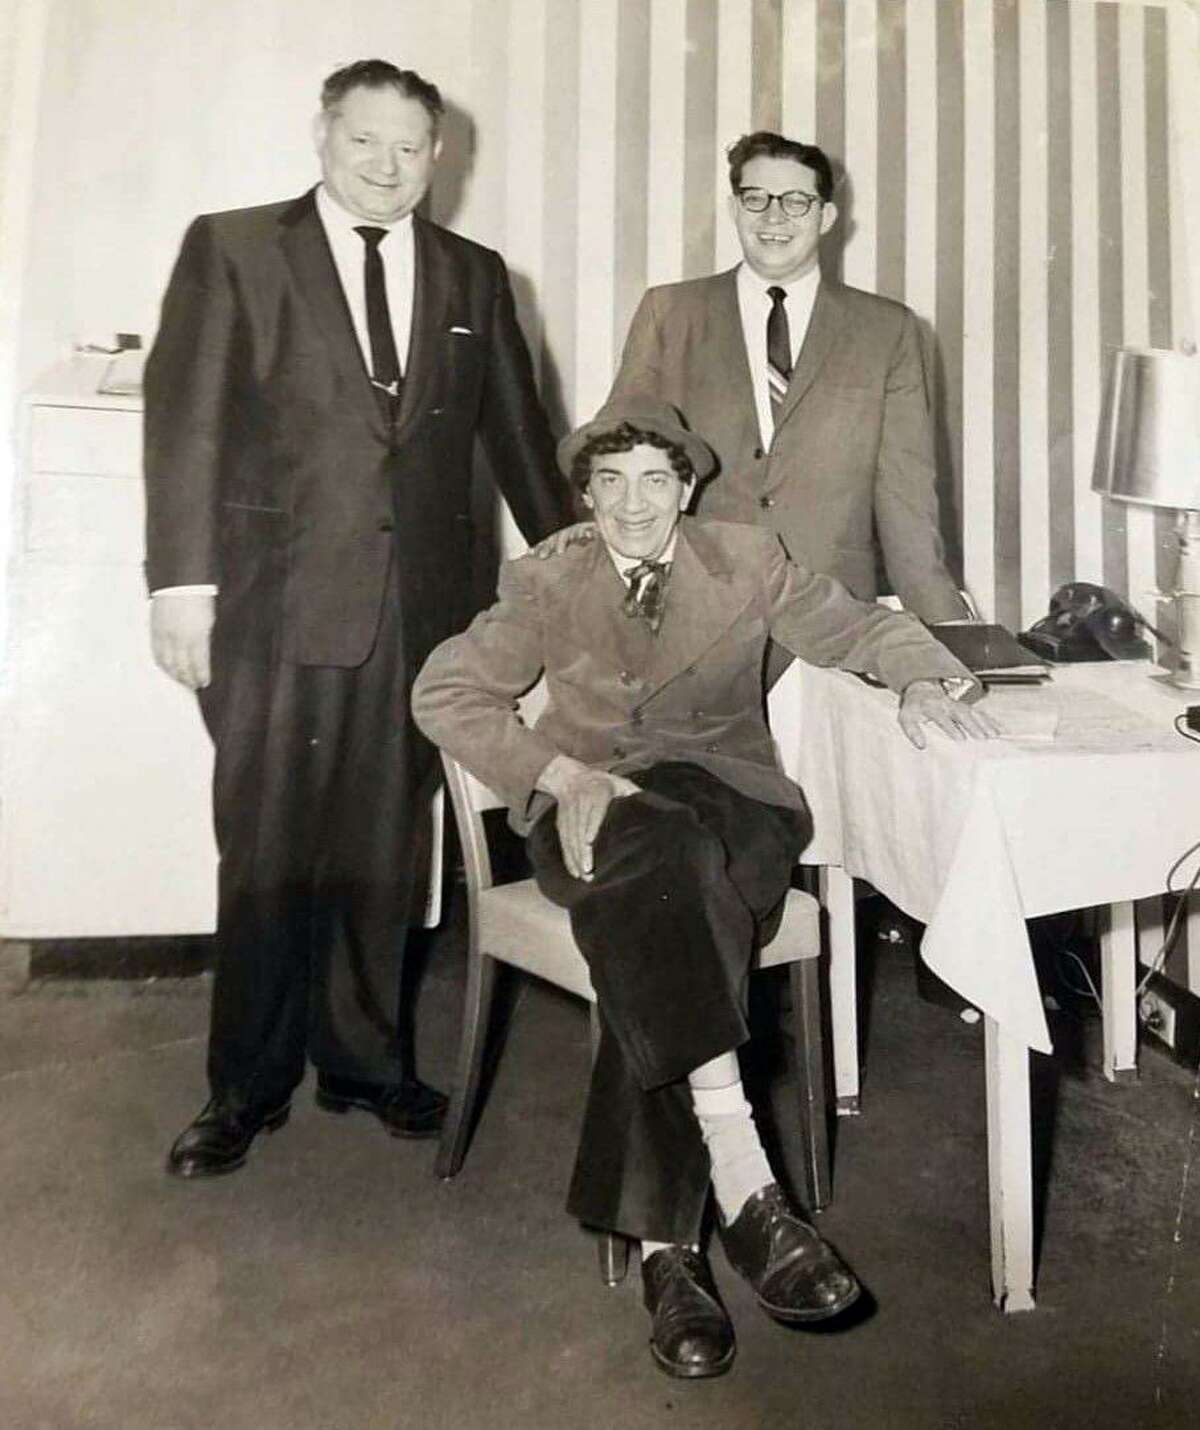 The Red Carpet restaurant welcomed many celebrities stopping in San Antonio, such as Chico Marx, shown here with co-owners Charles Madden, left, and Harold Cohen.